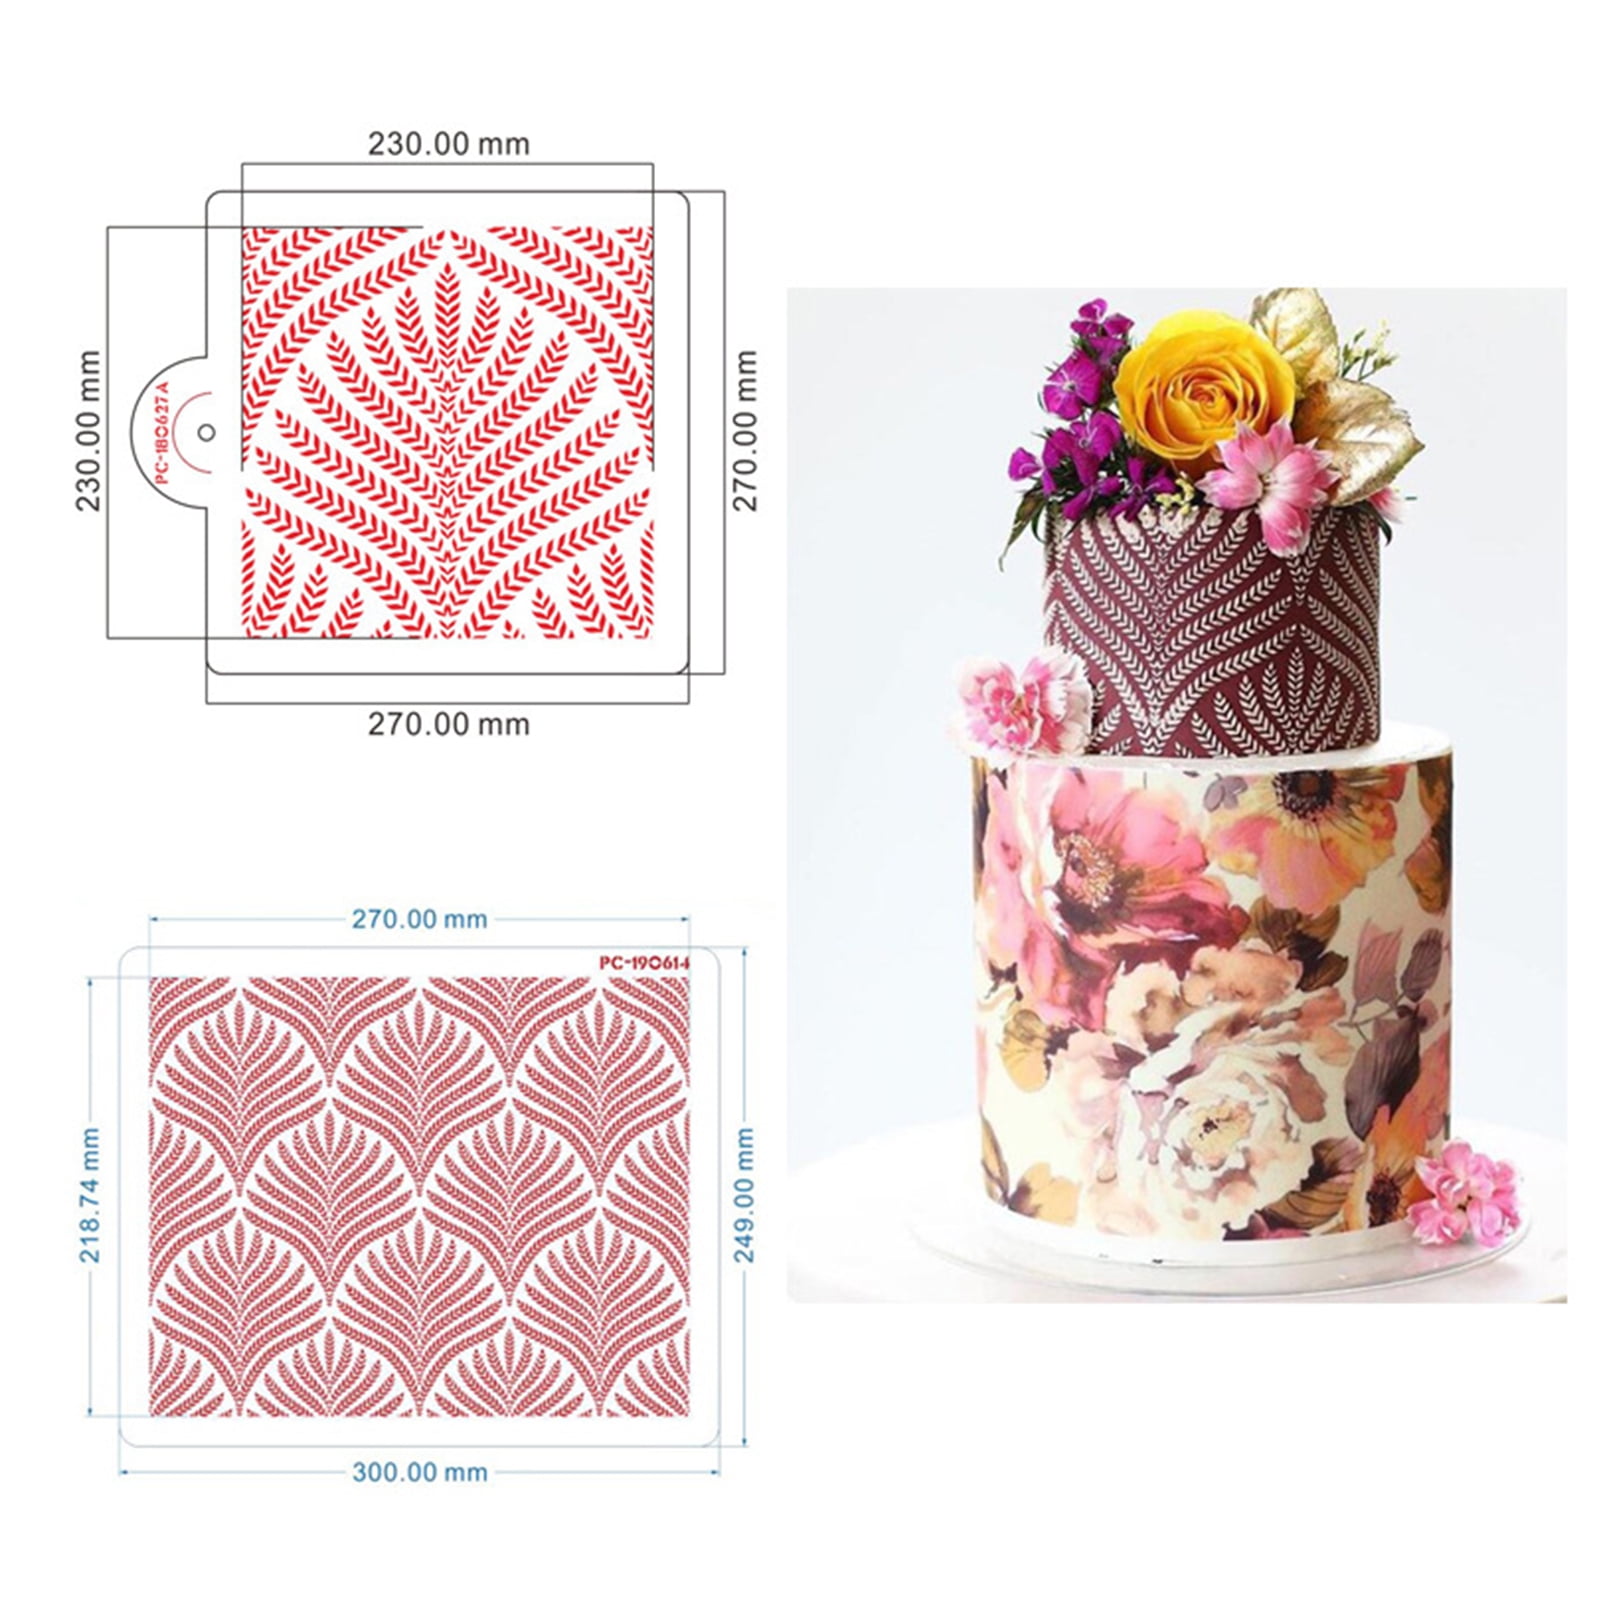 Details about   6 Cavities Silicone Rose Flower Cake Mold Soap Mold Candy Chocolate Baking Mould 